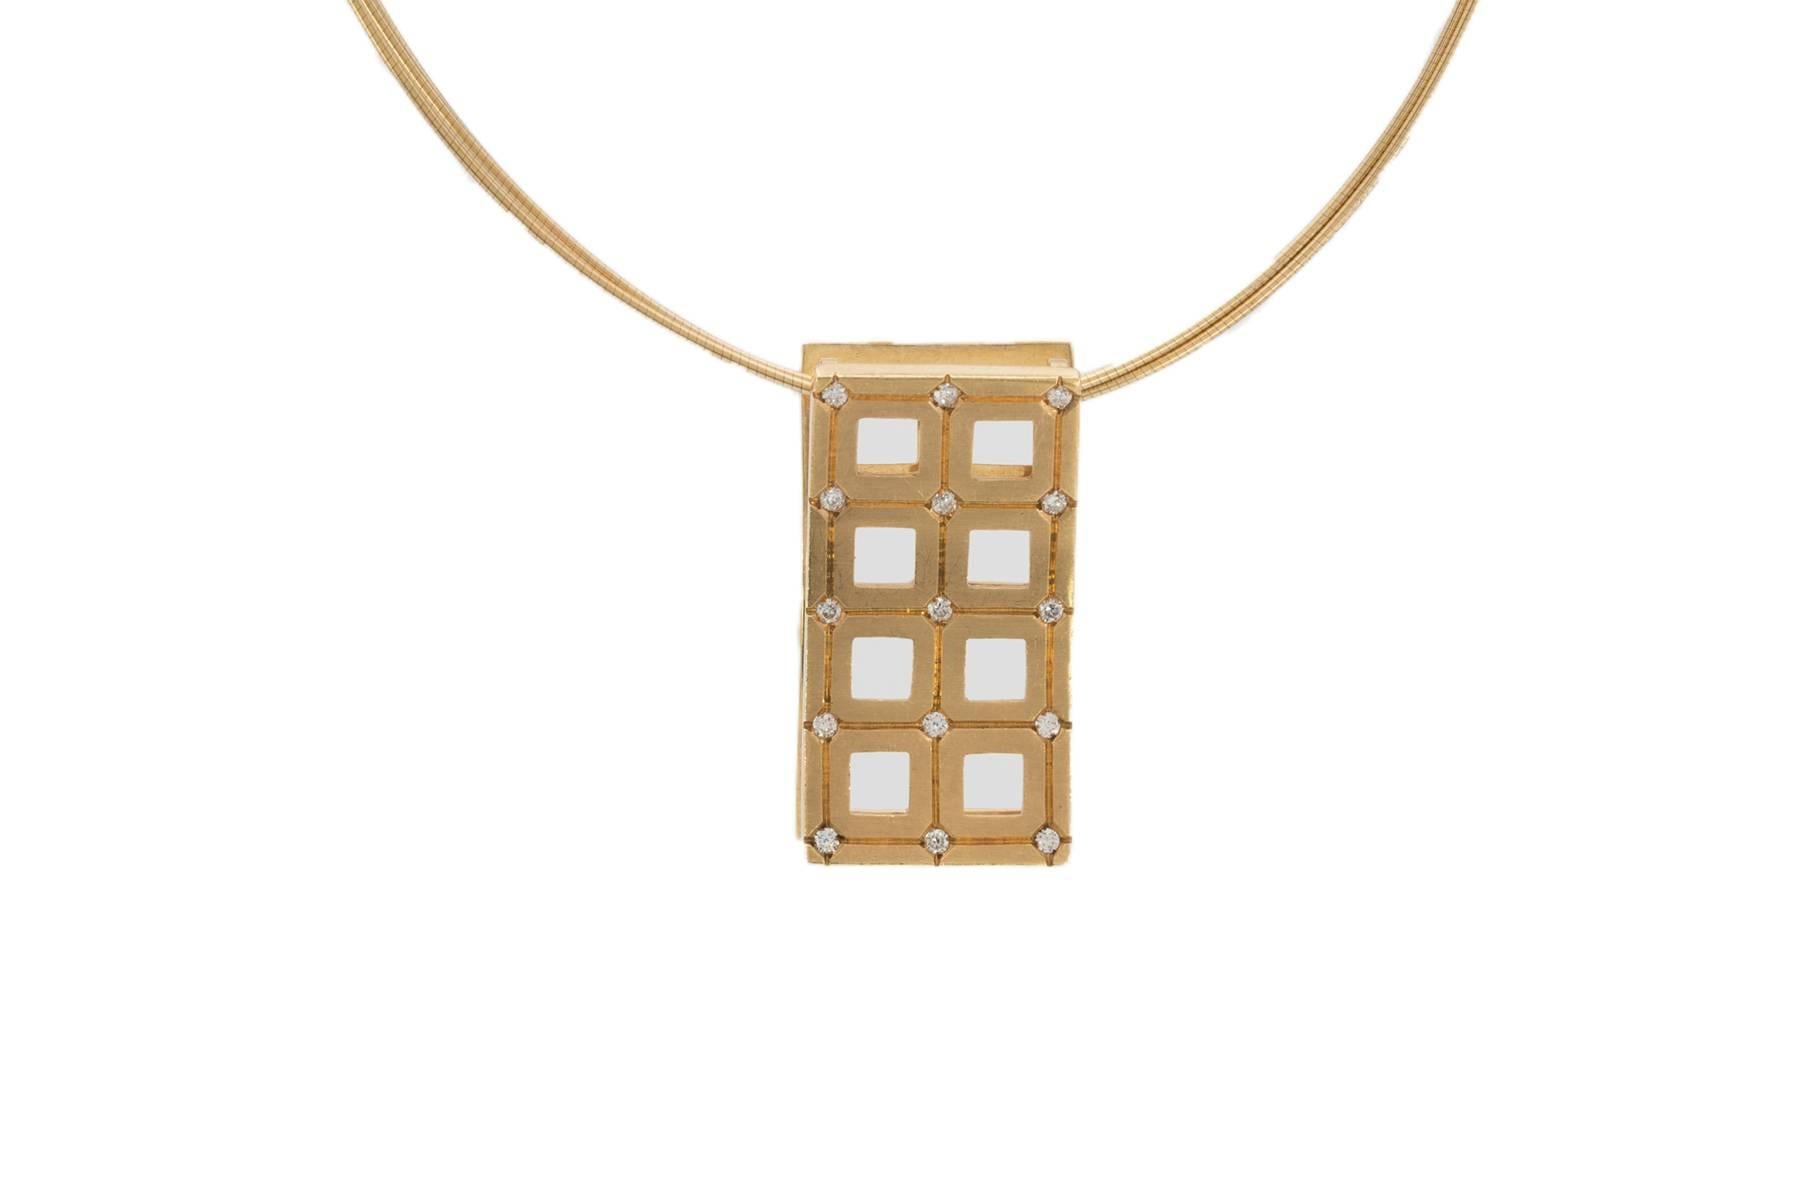 18K yellow gold rectangular concave diamond slide pendant containing 15 diamonds weighing combined 0.23 carat.
The slide is shown here on a triple strand 18K round omega with barrel clasp that is 17